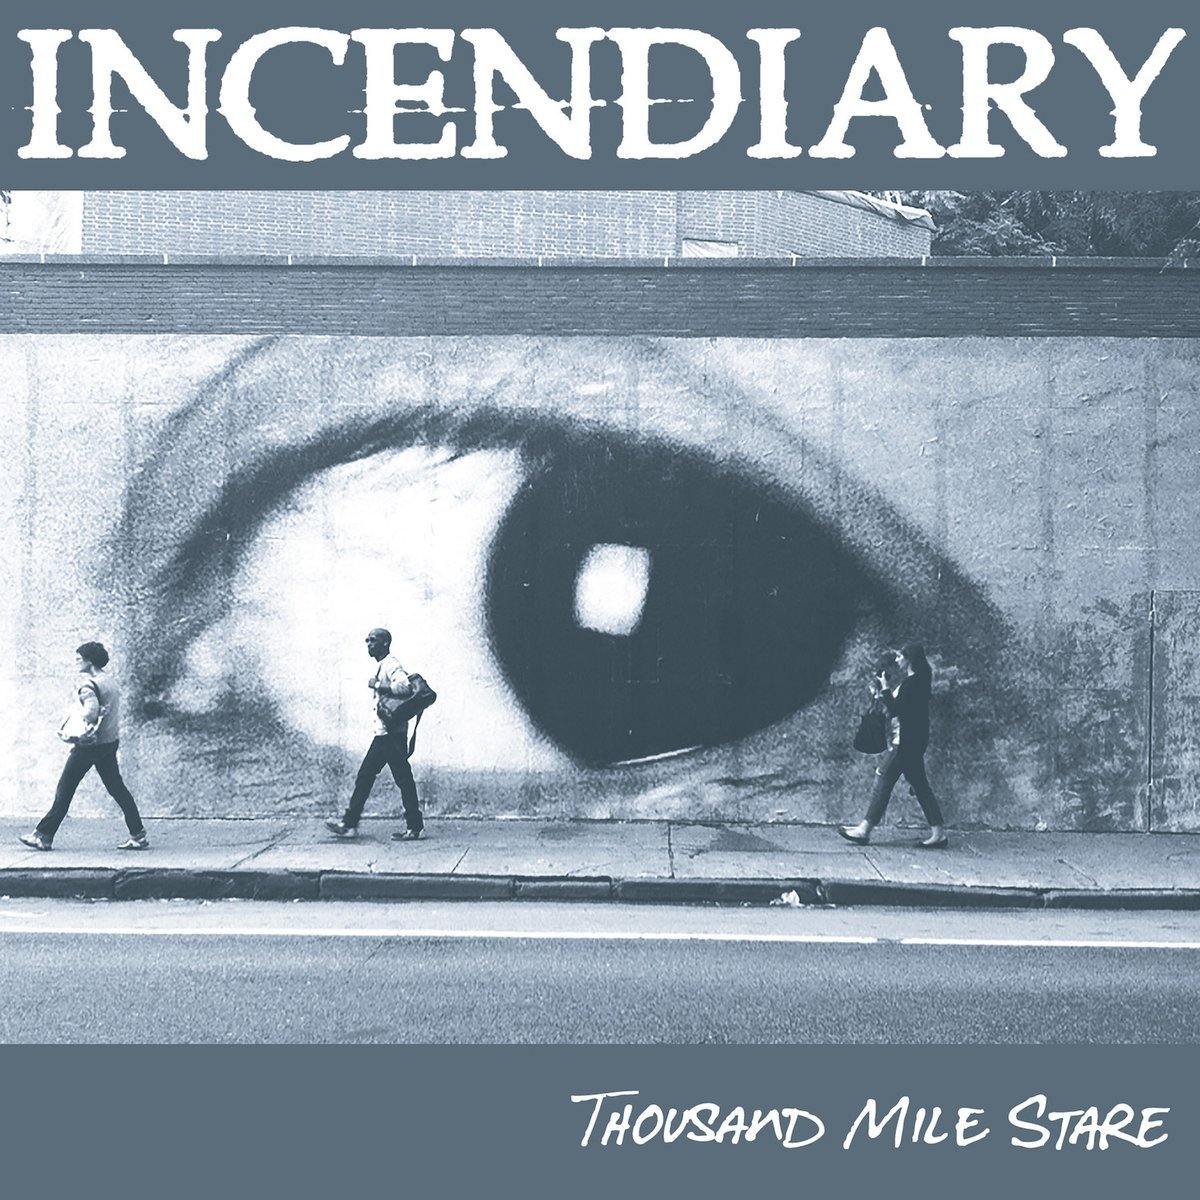 Buy – Incendiary "Thousand Mile Stare" 12" – Band & Music Merch – Cold Cuts Merch